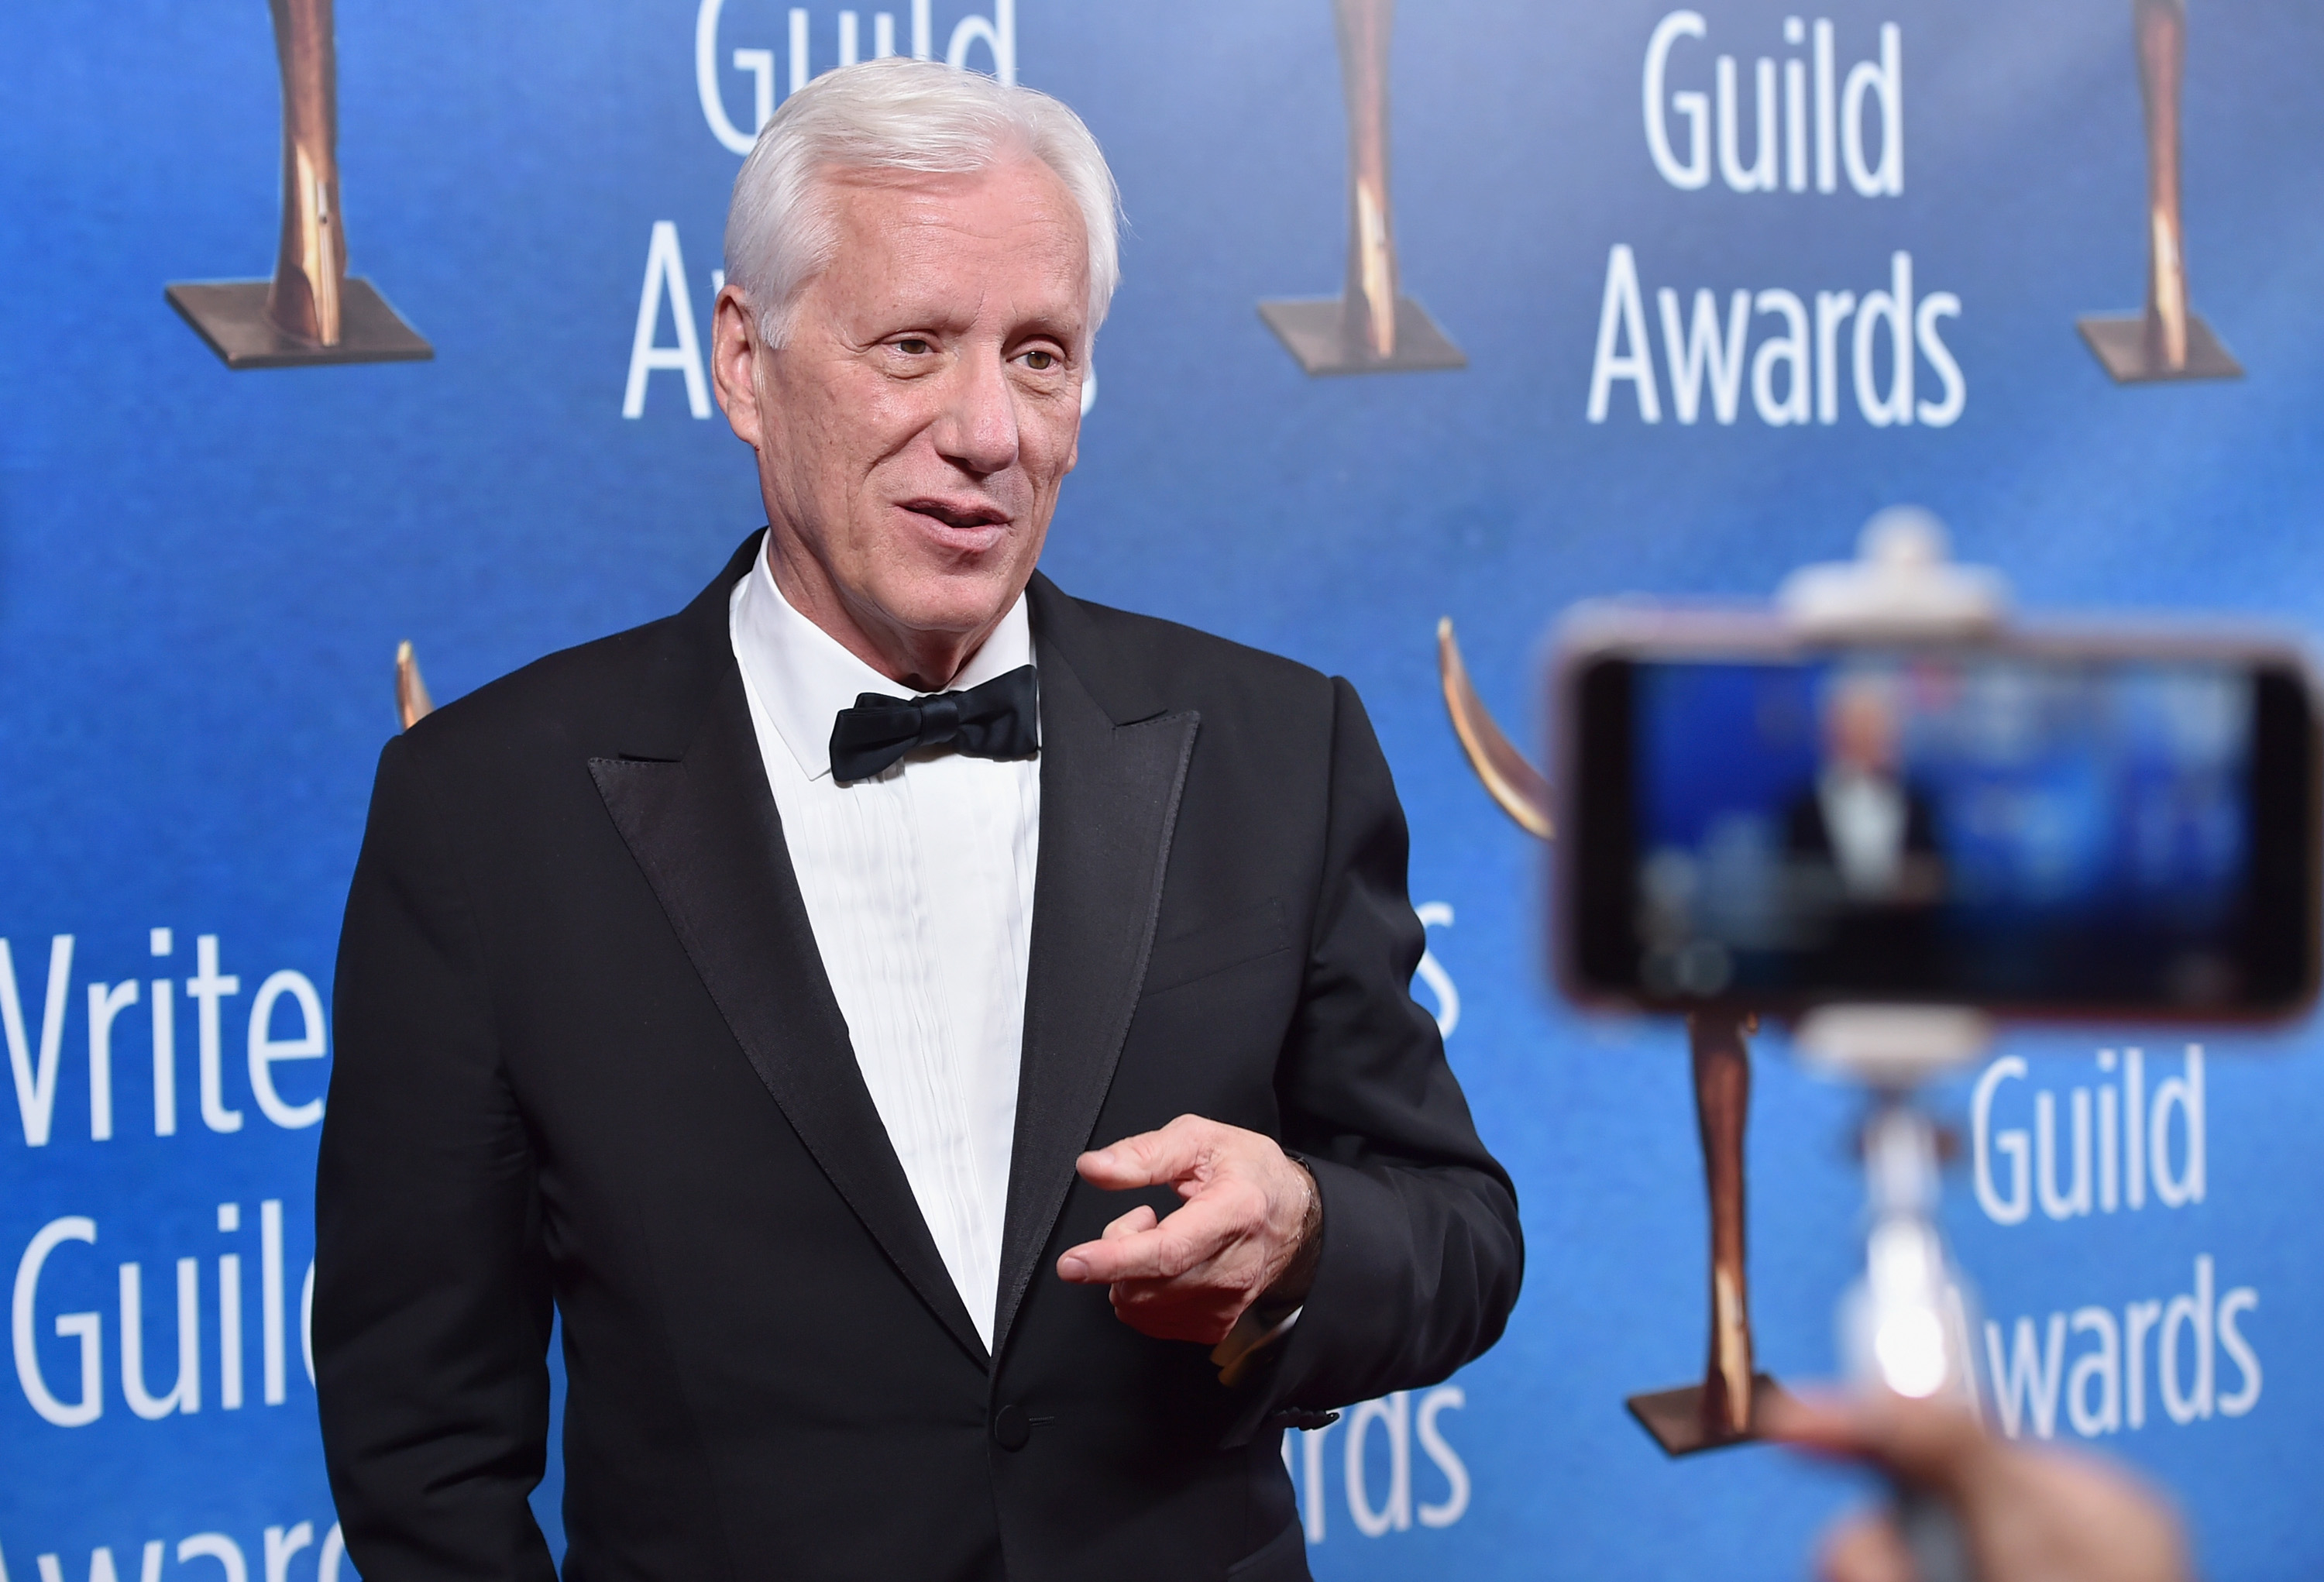 James Woods at an event